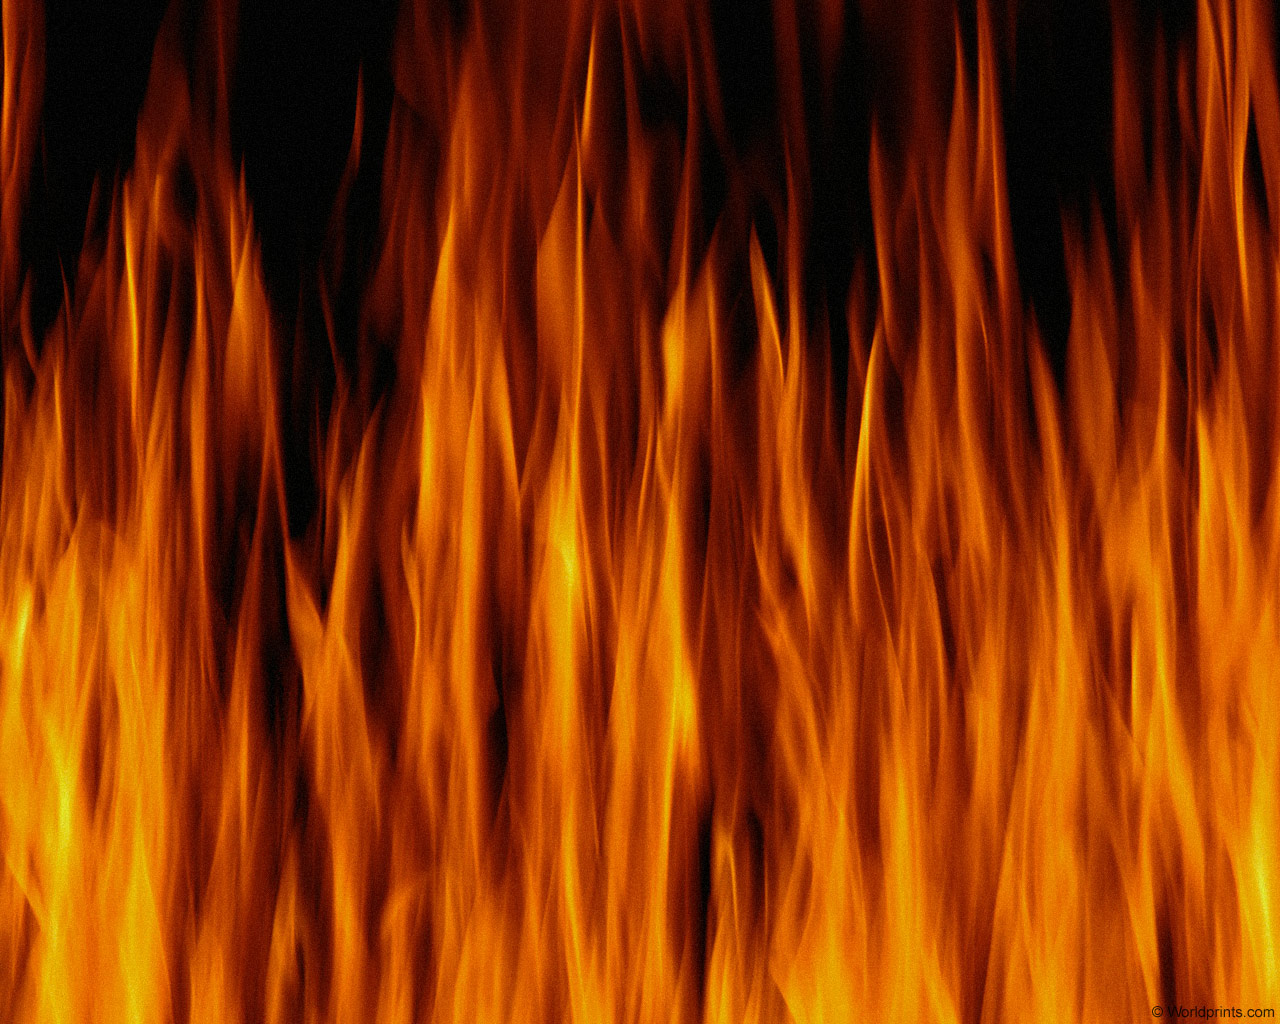  flame fire background texture download photo background